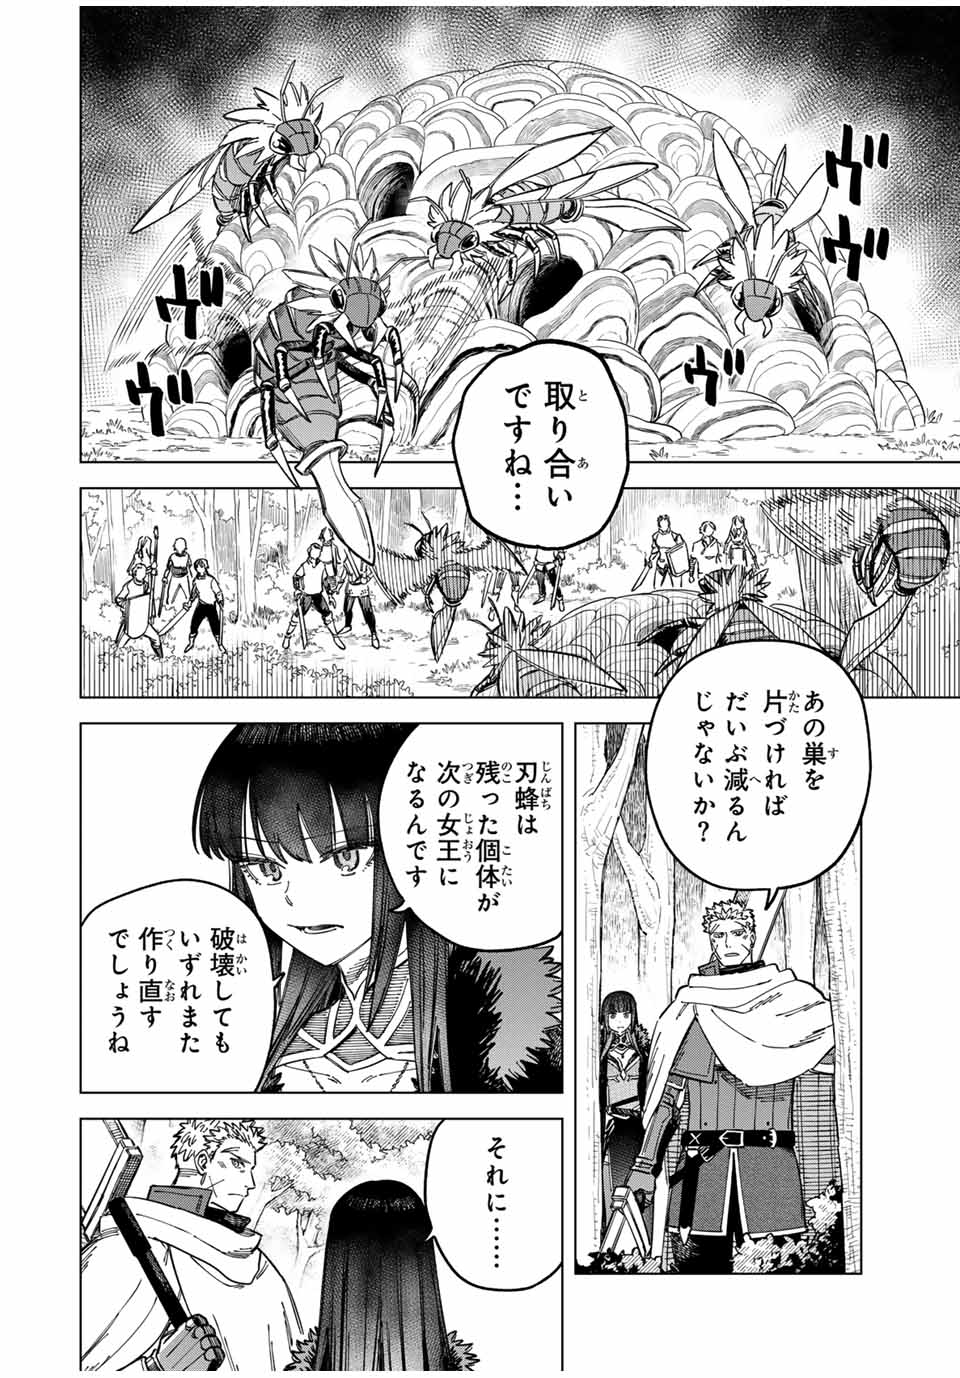 Witch and Mercenary 魔女と傭兵 第9.1話 - Page 2